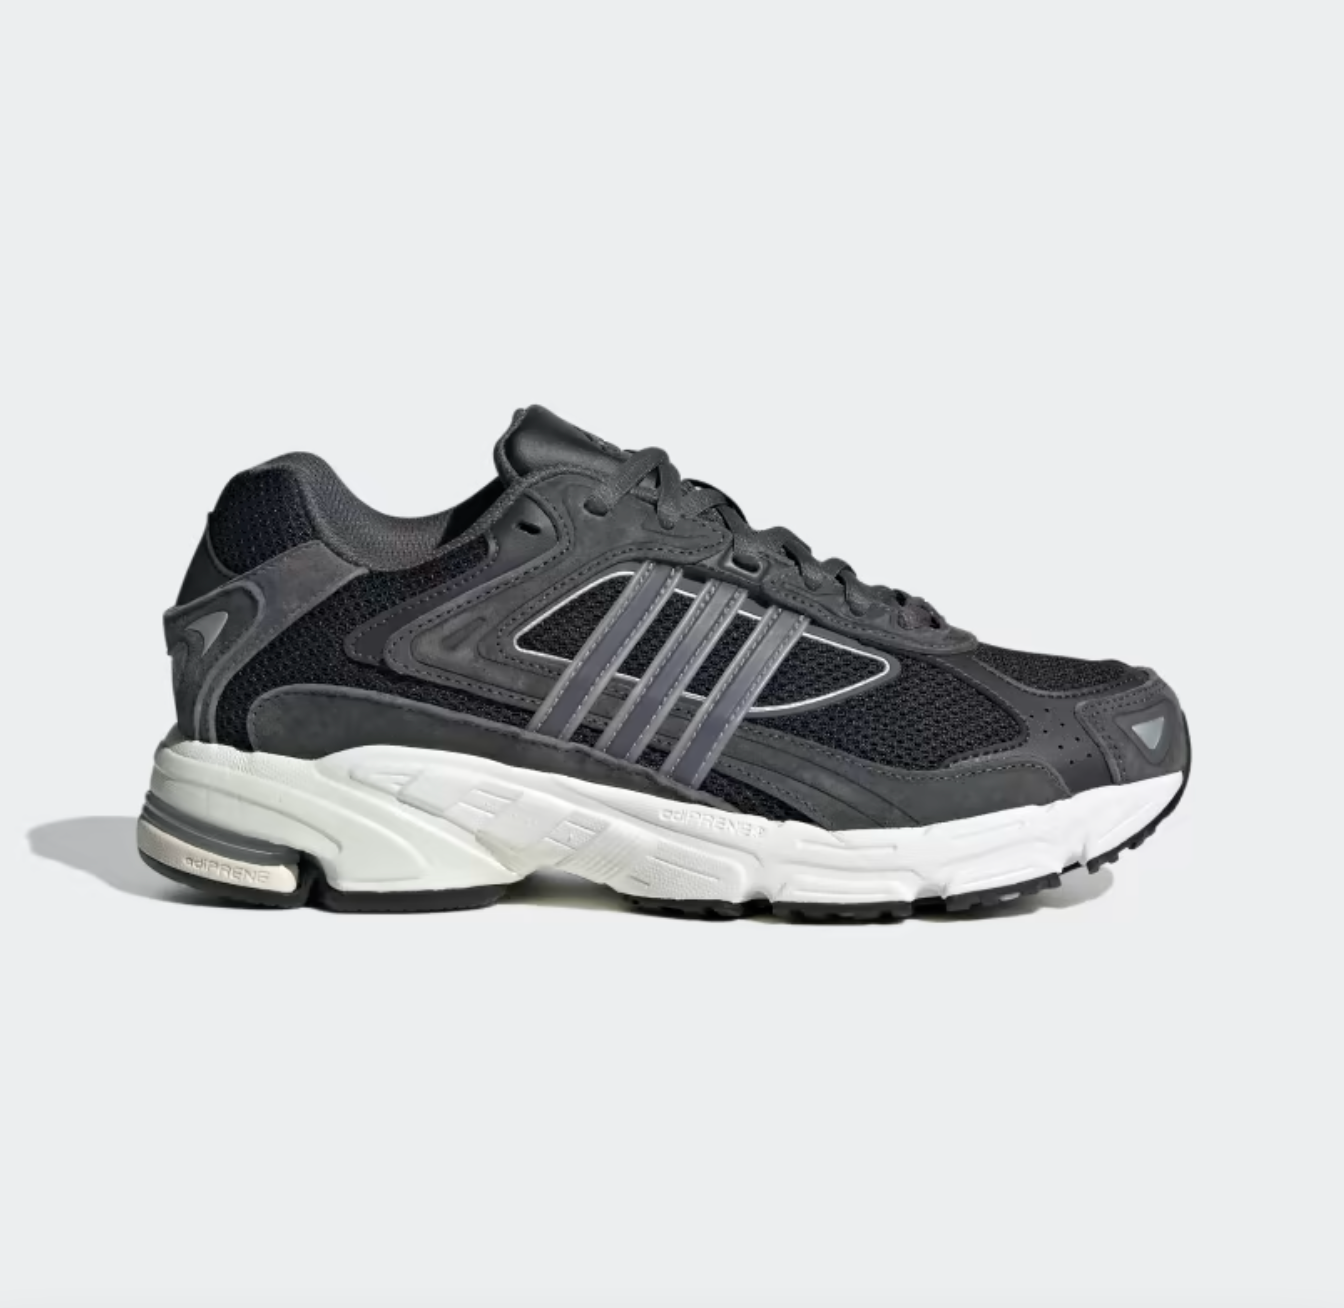 Adidas + Response CL Shoes